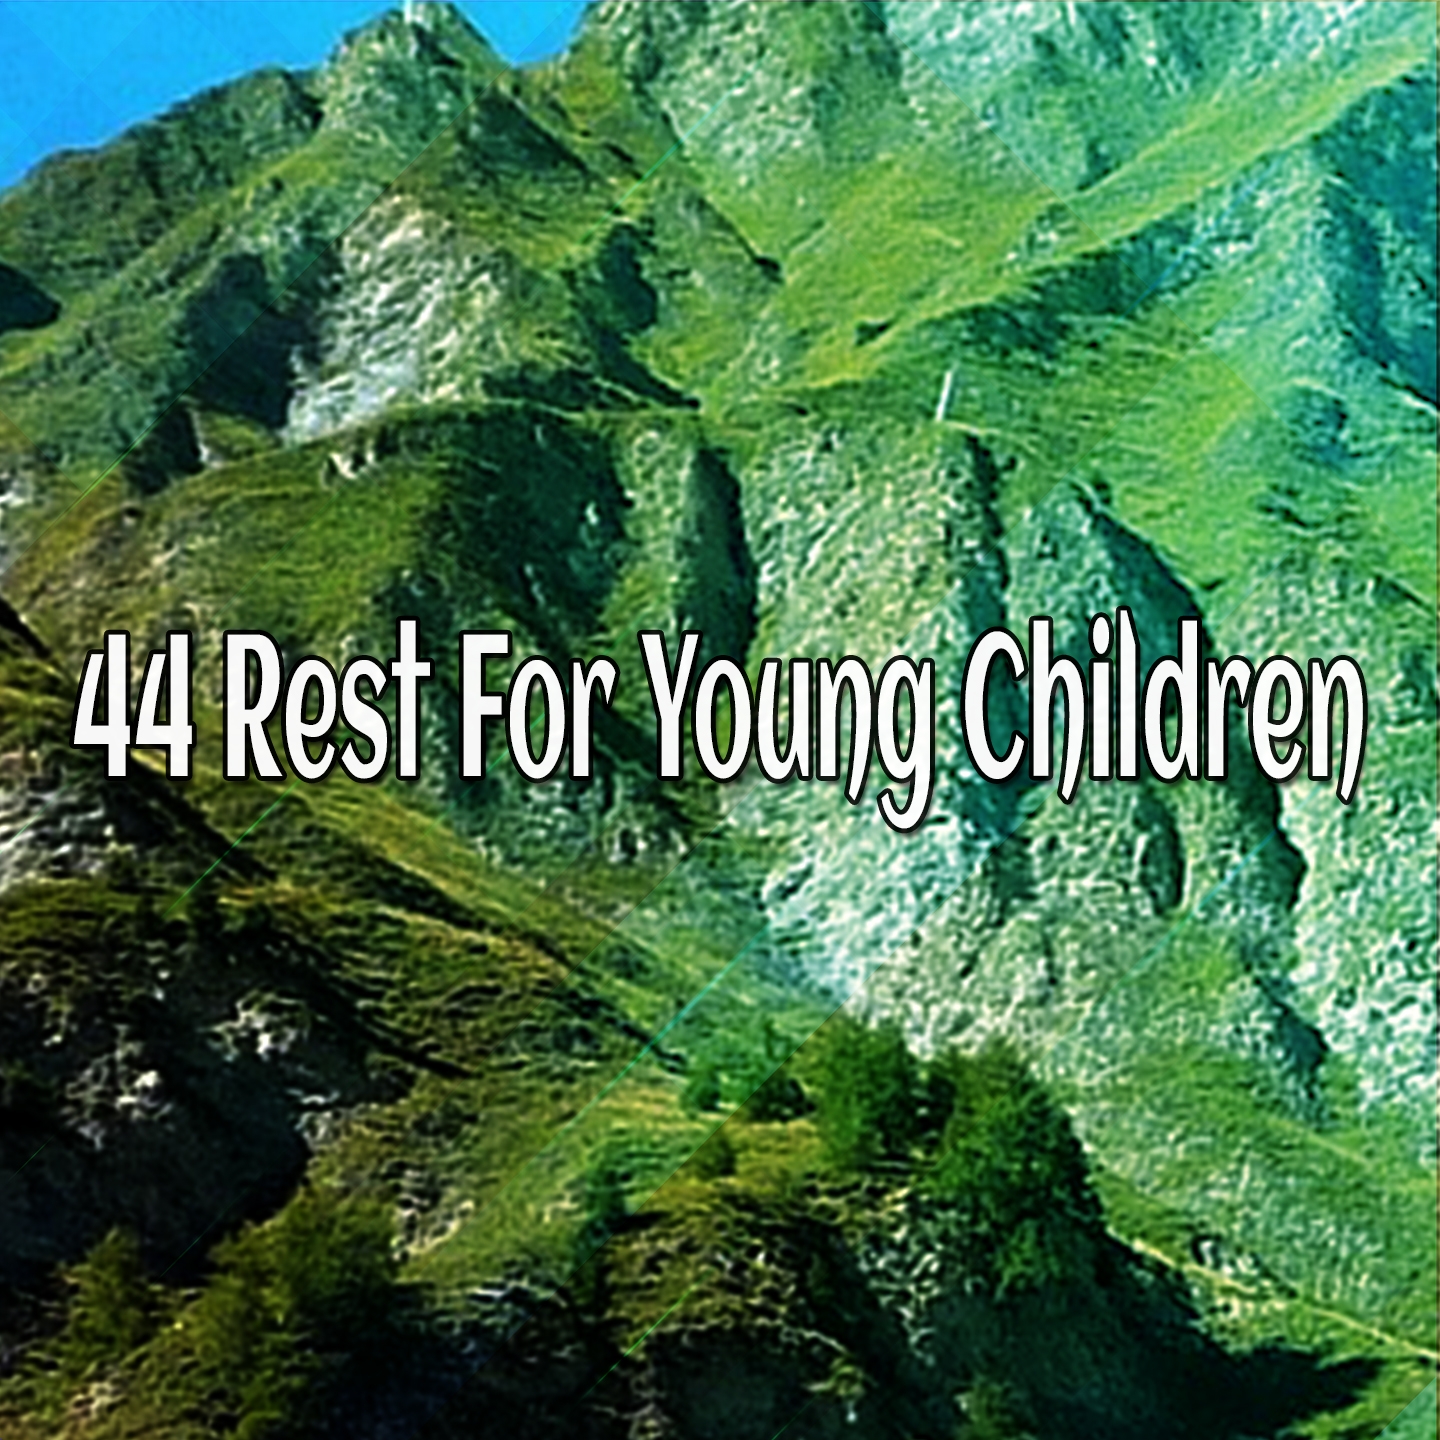 44 Rest For Young Children